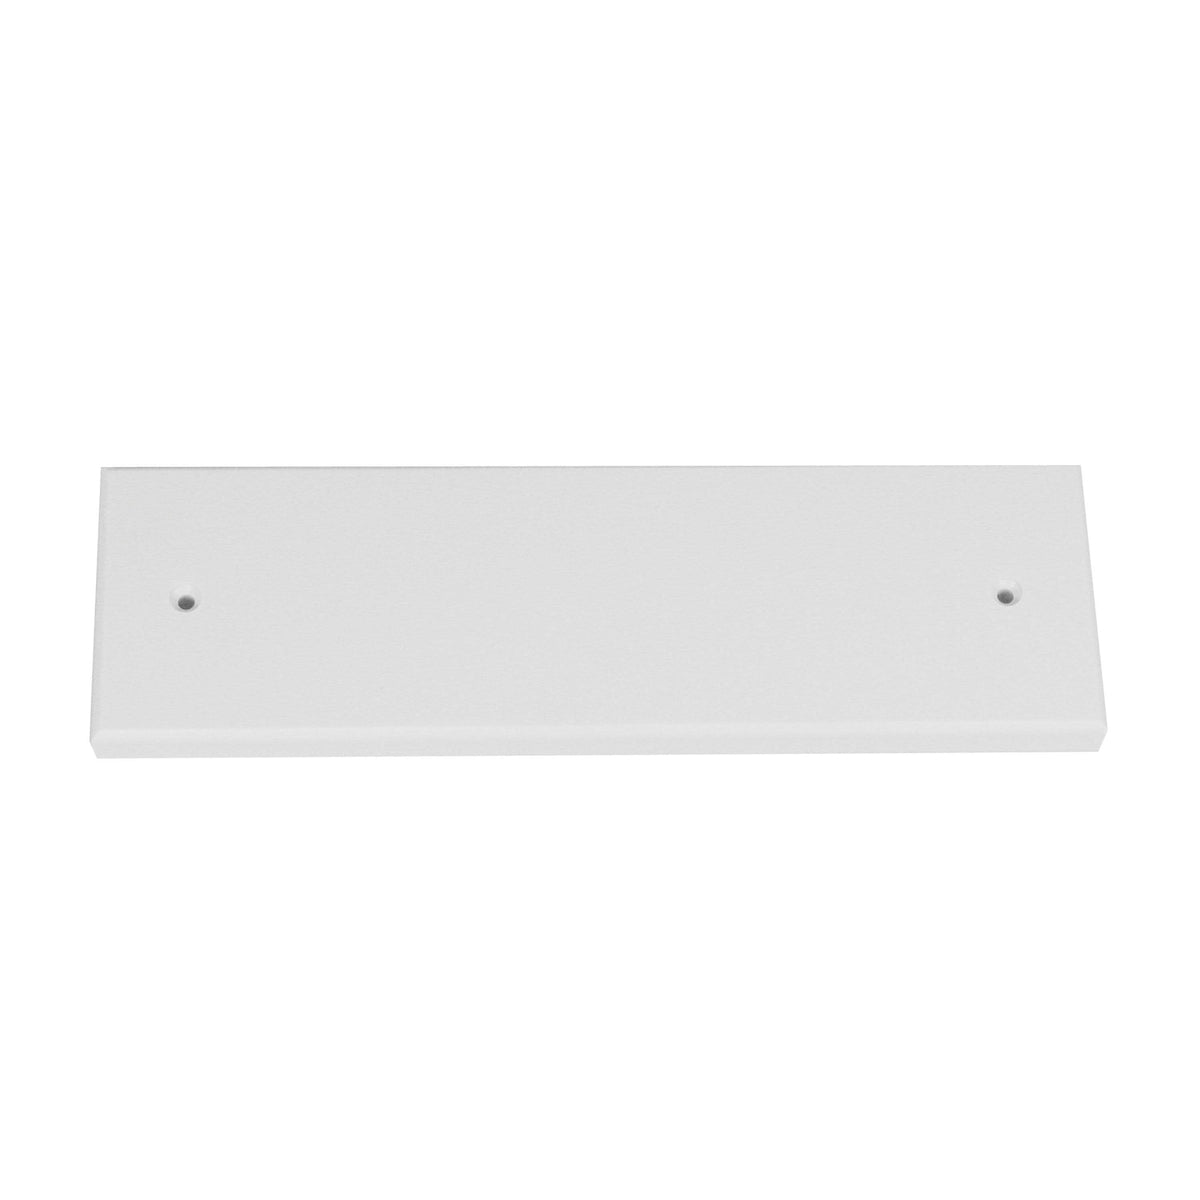 Rig Rite Transducer Mounting Plate Light Gray 12" #920